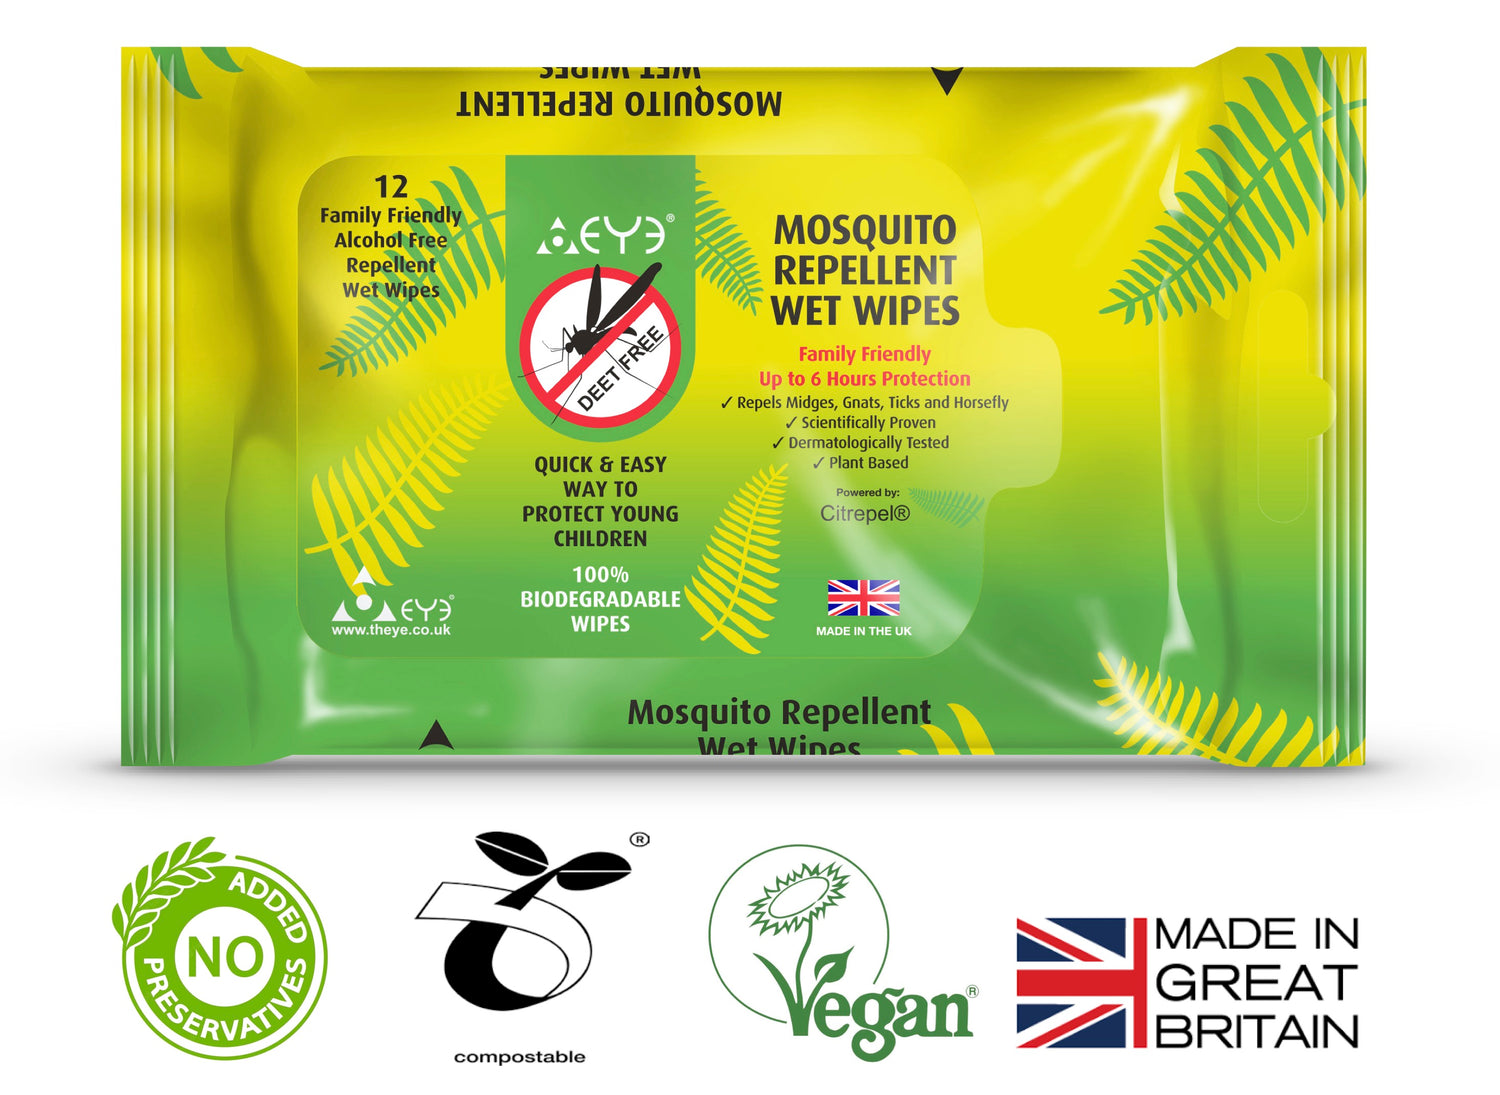 Mosquito Repellent Wet Wipes - 12 pack